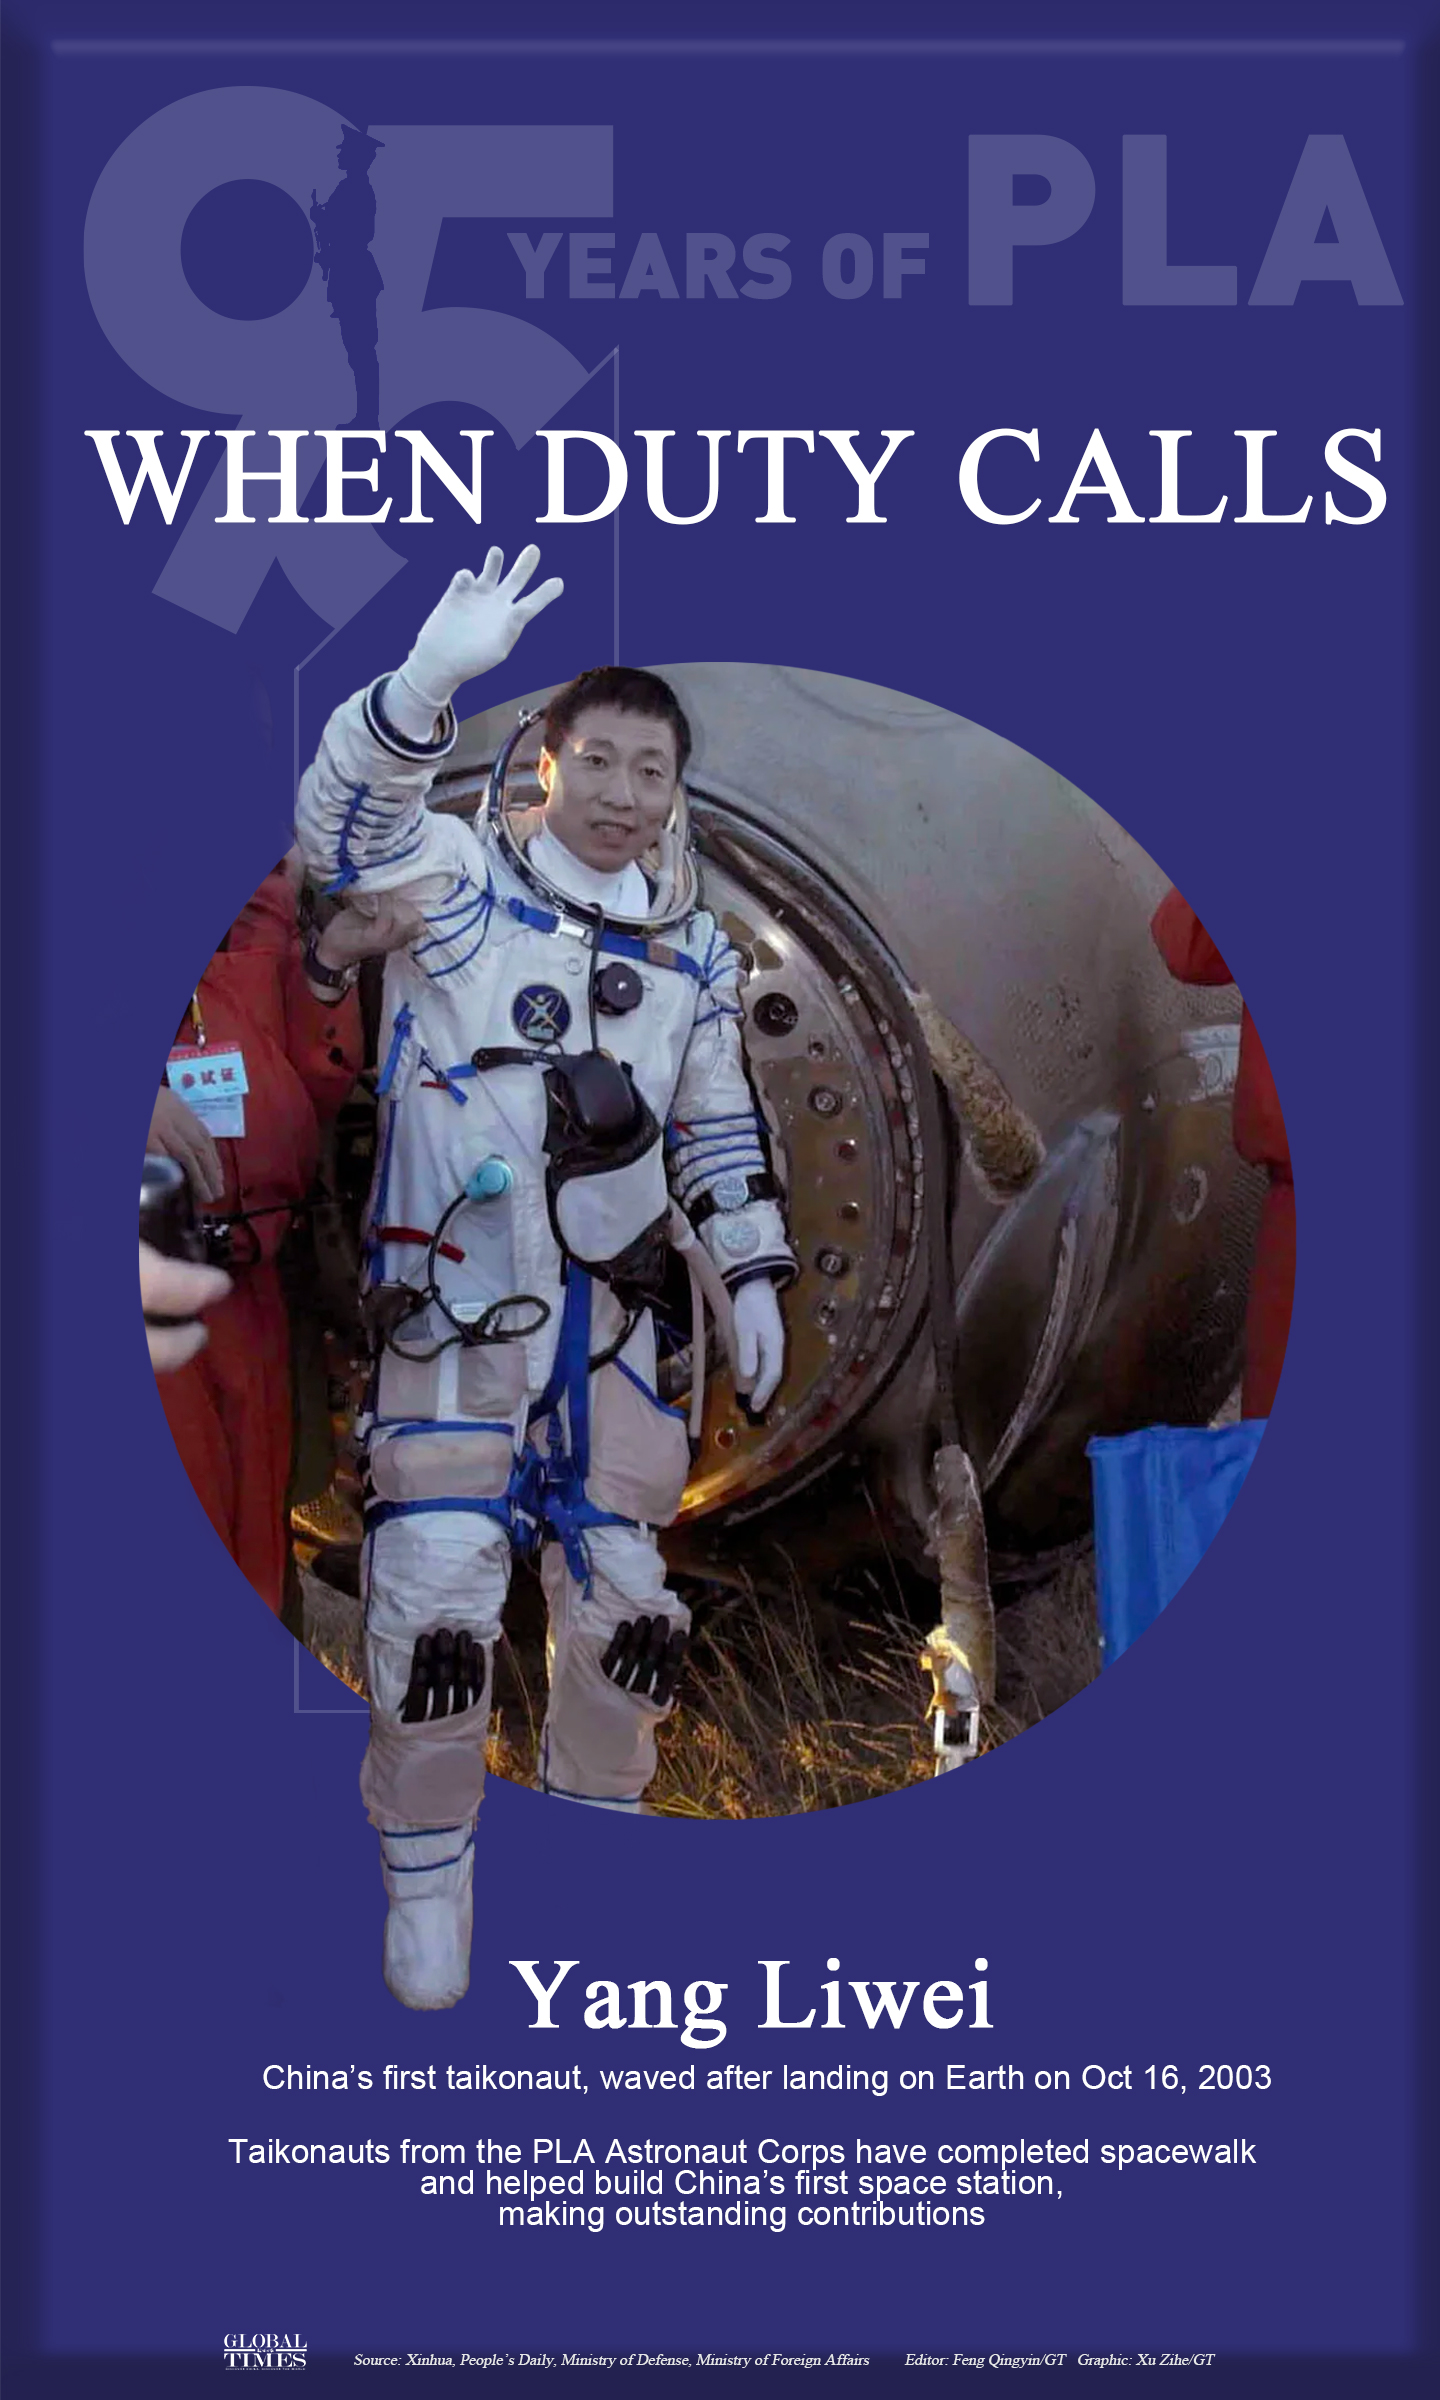 When duty calls: Yang Liwei, China’s first taikonaut, waved after landing on Earth. Taikonauts from PLA Astronaut Corps have made outstanding contributions to China’s exploration of space. Editor: Feng Qingyin/GT Graphic: Xu Zihe/GT